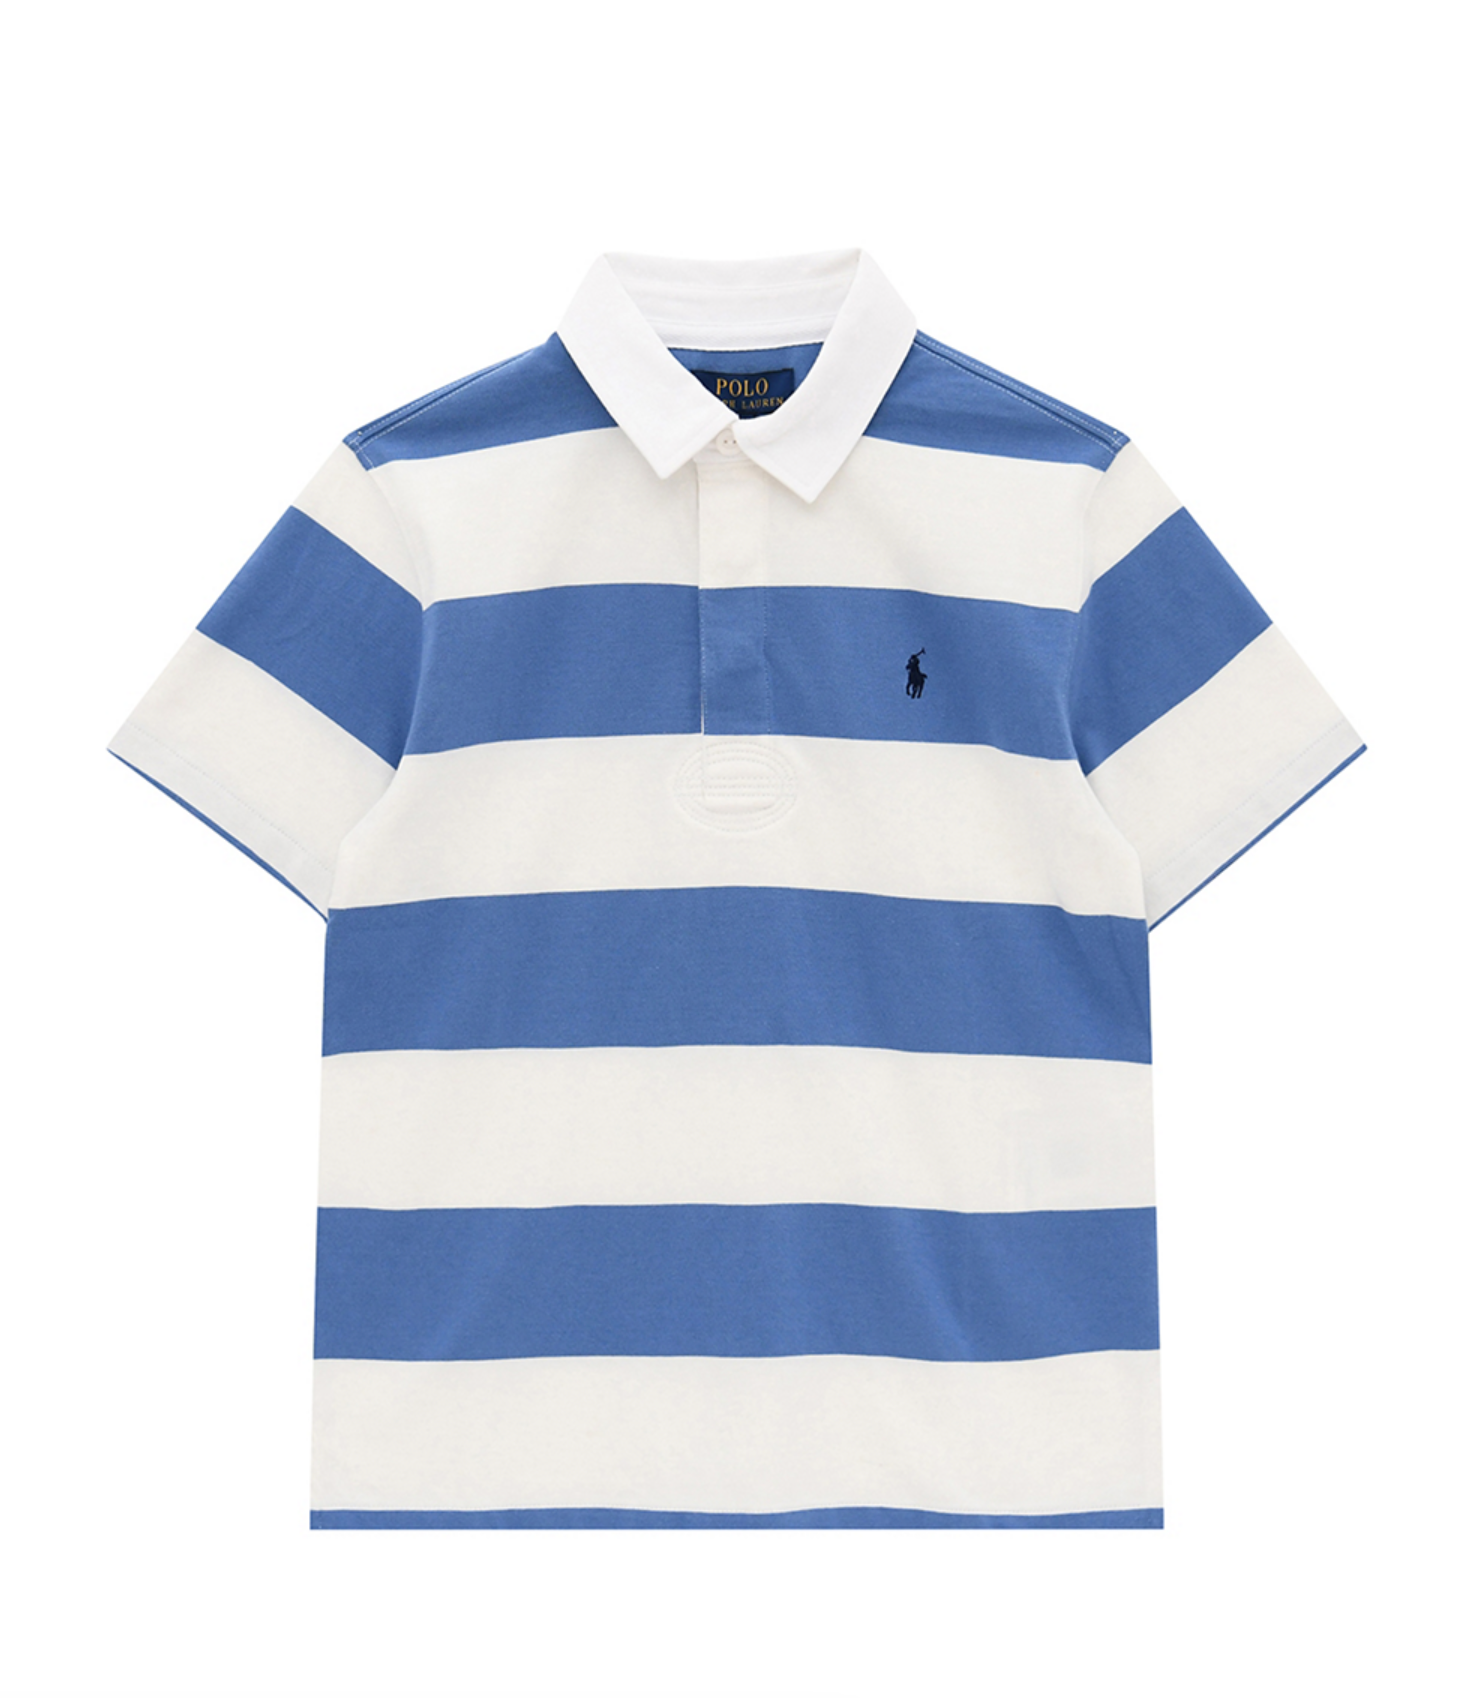 SHORT-SLEEVE COTTON JERSEY RUGBY POLO - STRIPE